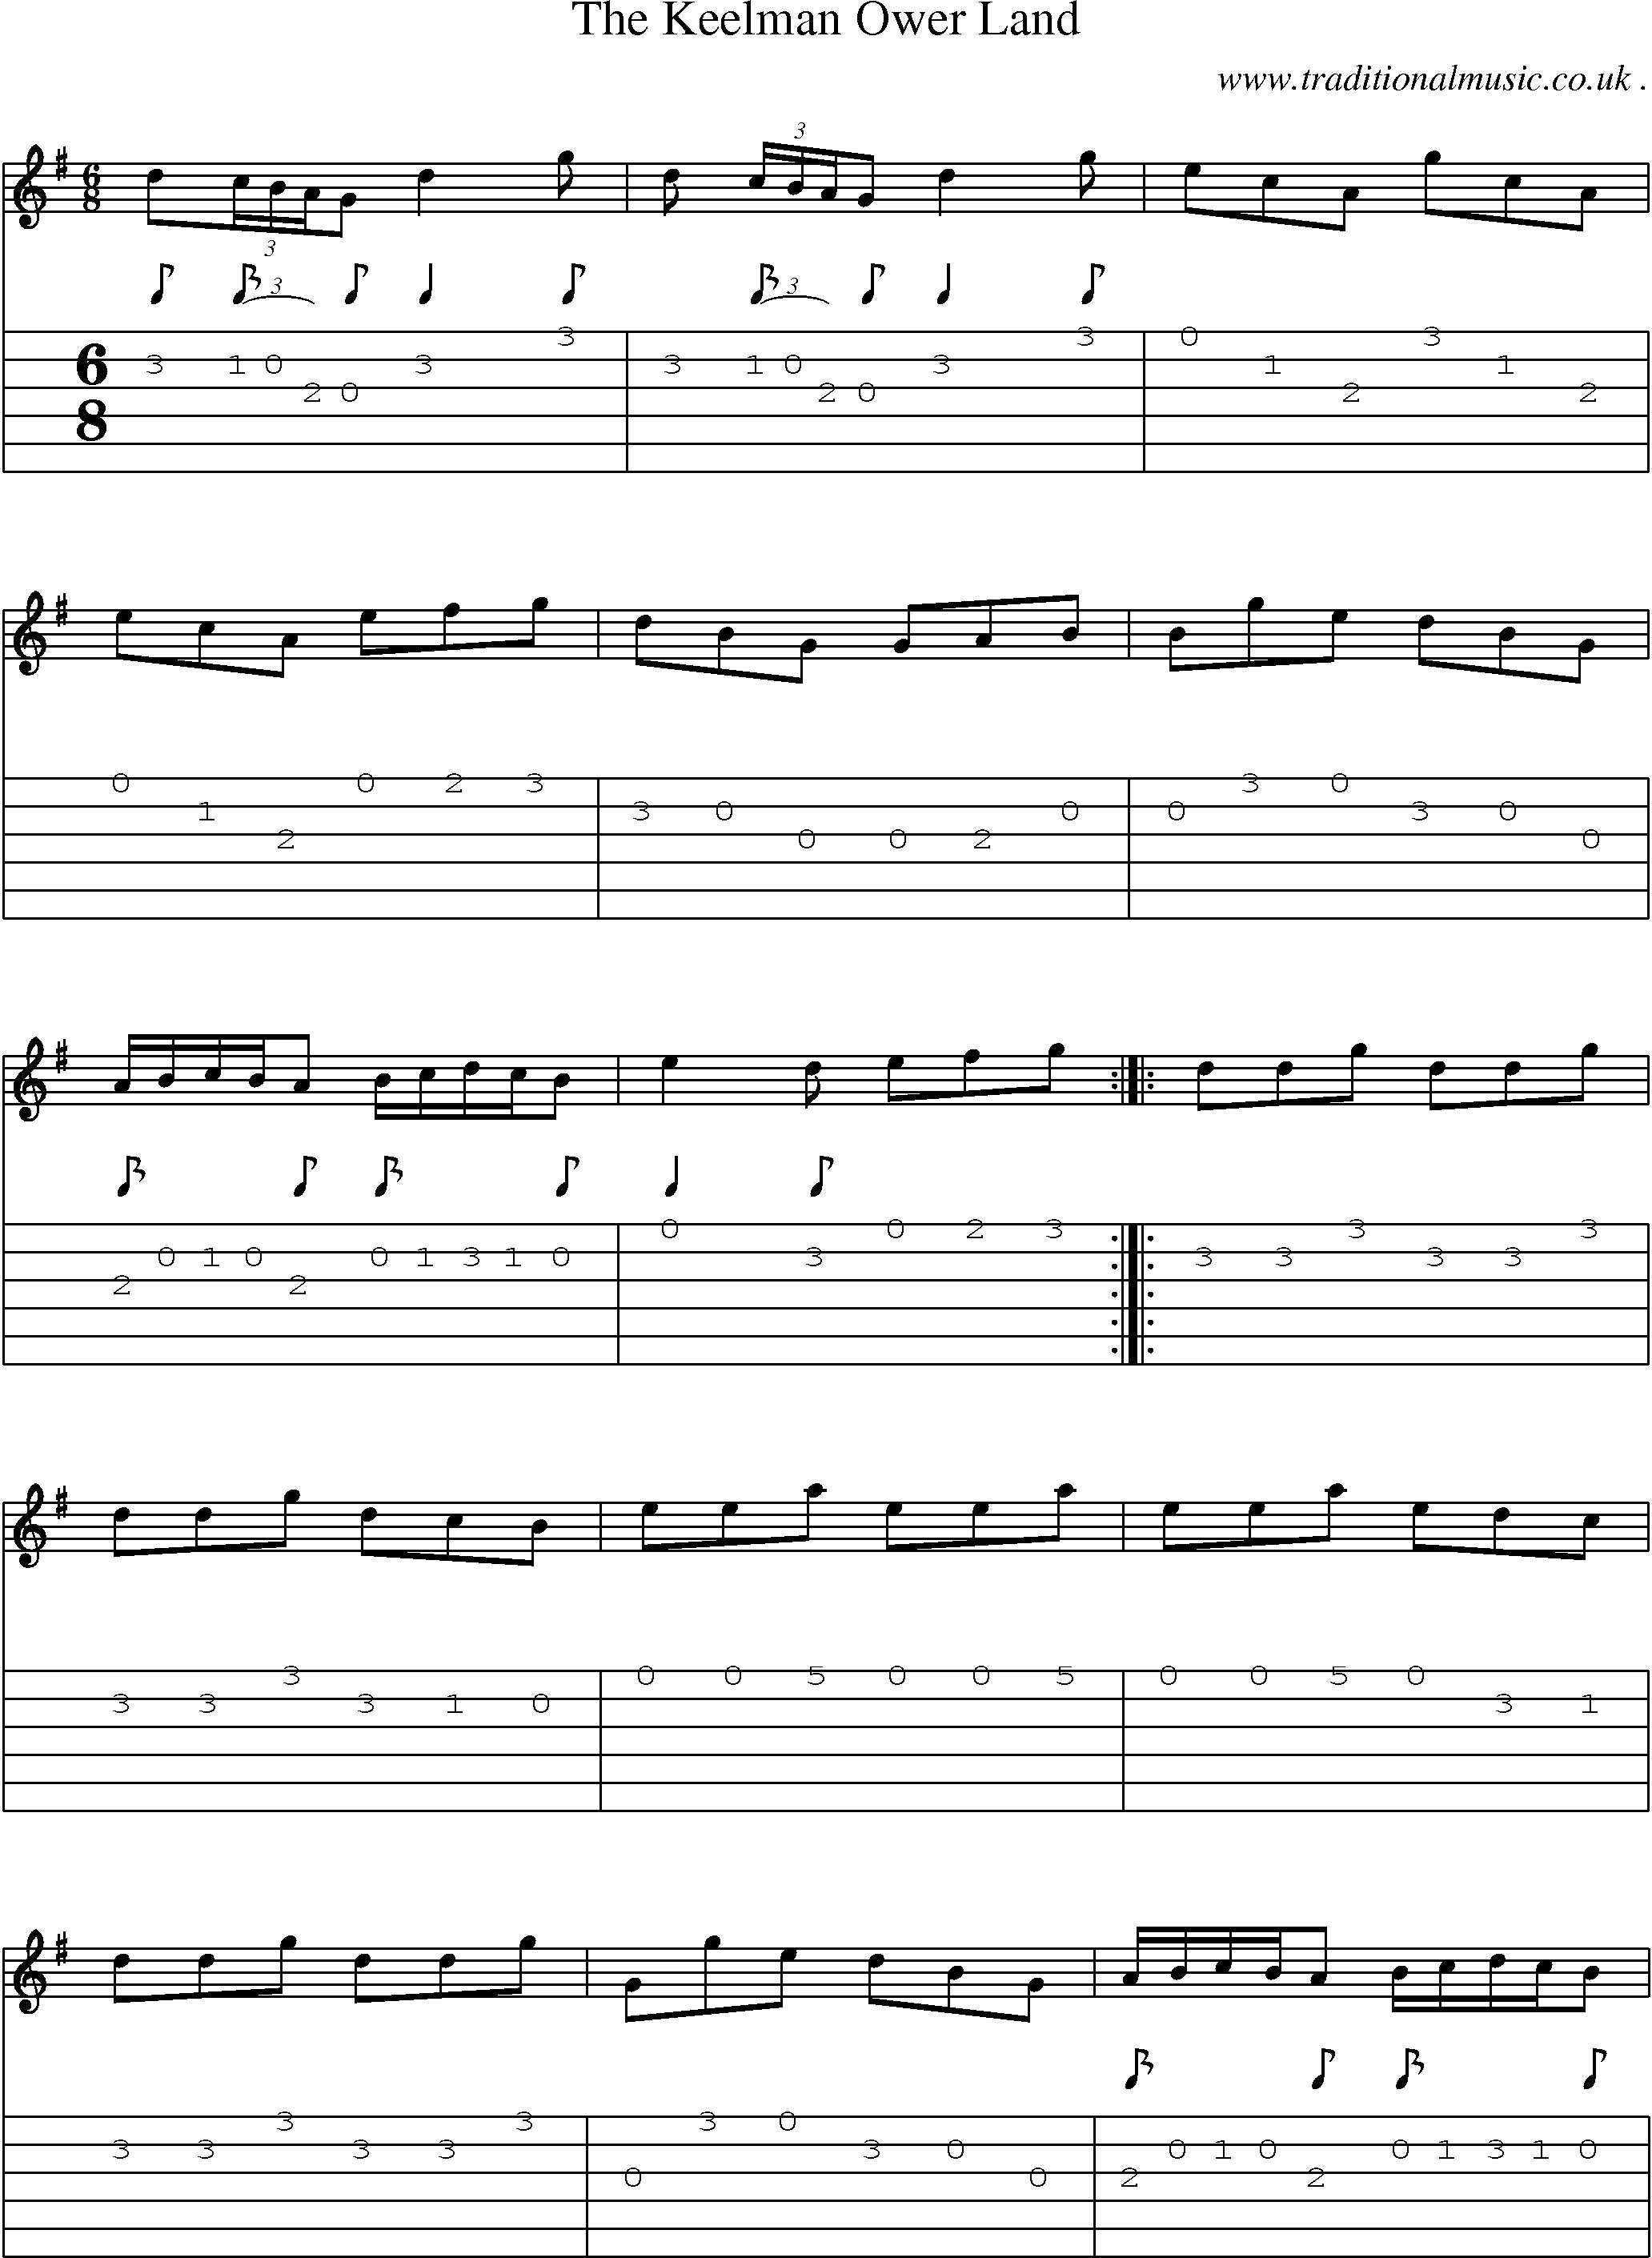 Sheet-Music and Guitar Tabs for The Keelman Ower Land